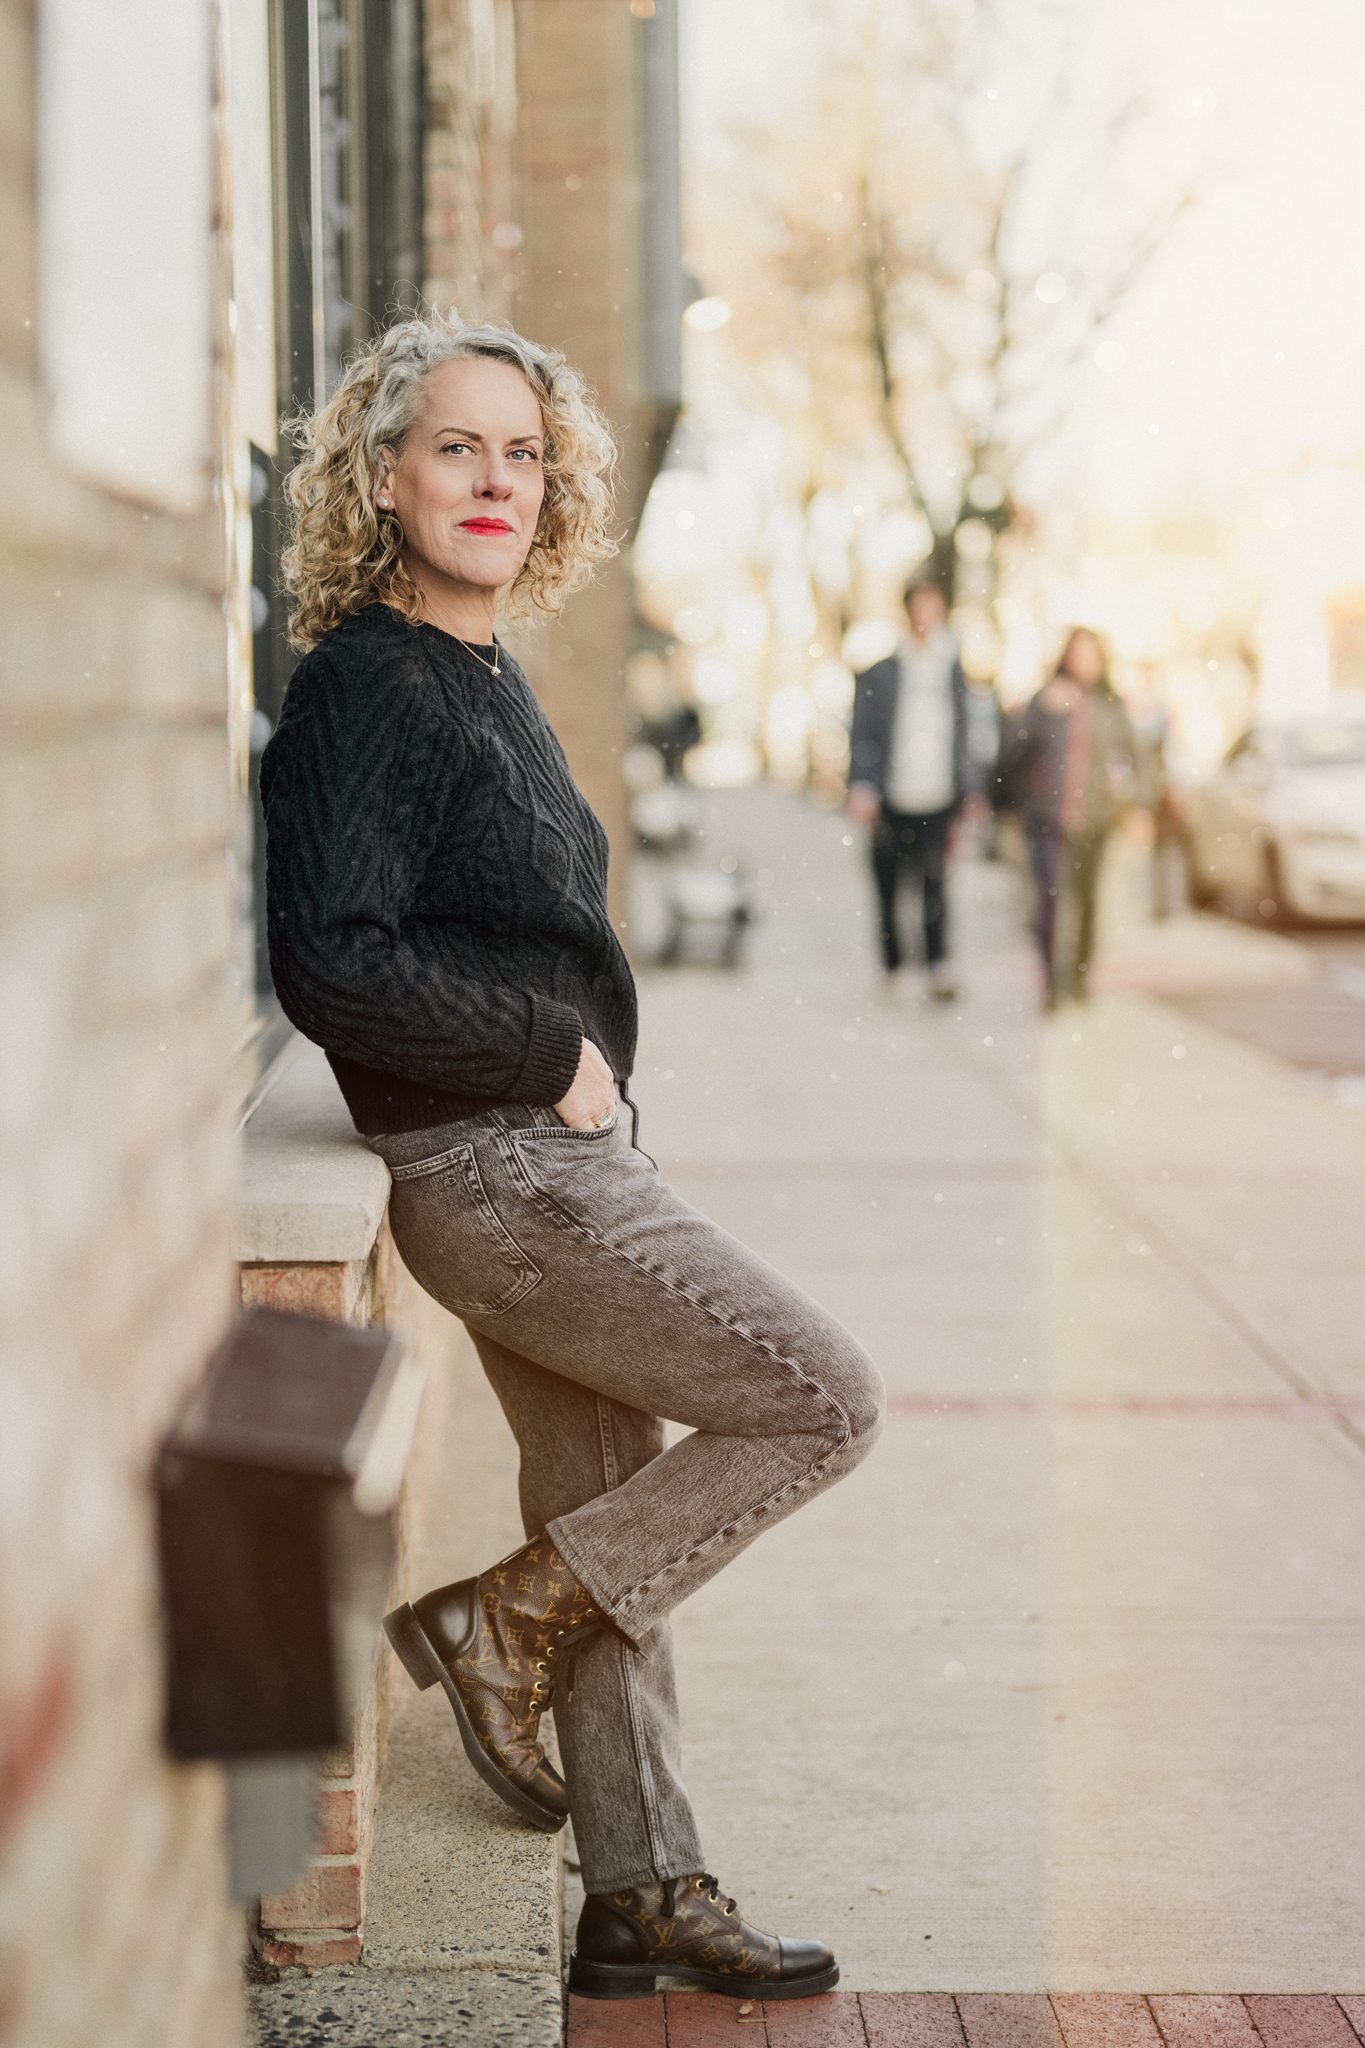 woman with blonde curly hair during her dating photoshoot